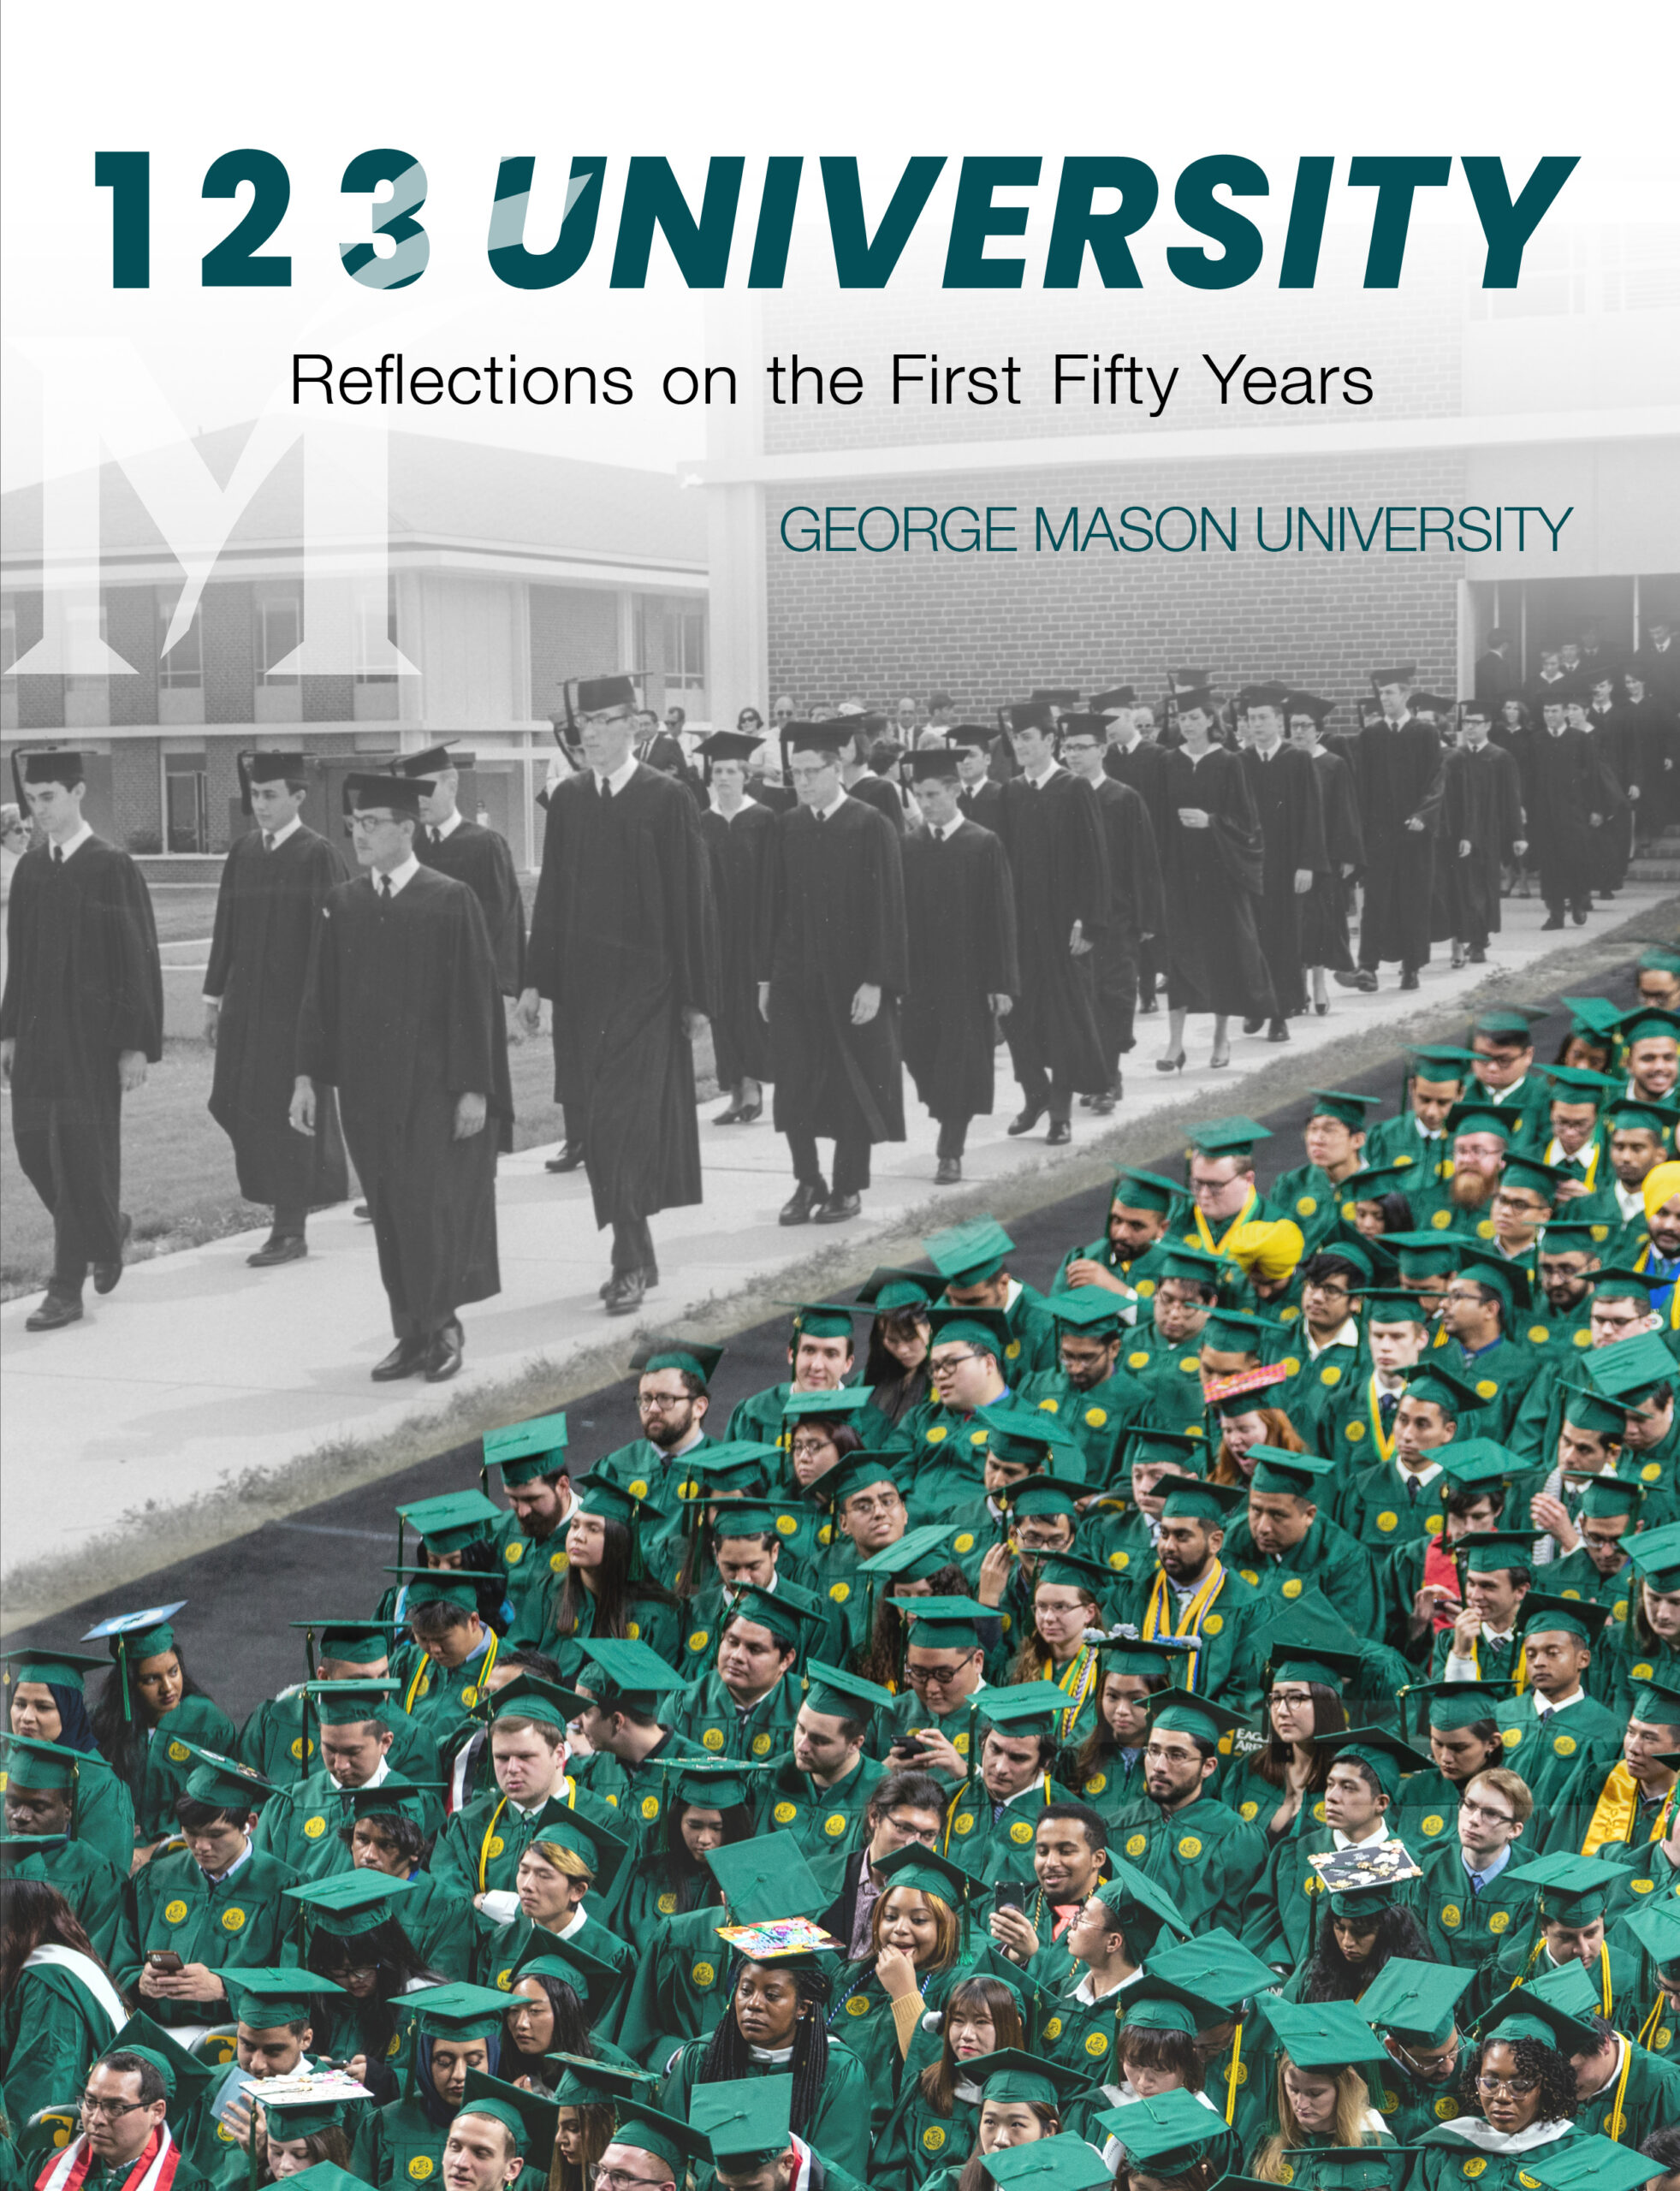 1 2 3 University: Reflections on the First Fifty Years - George Mason University (book cover image)